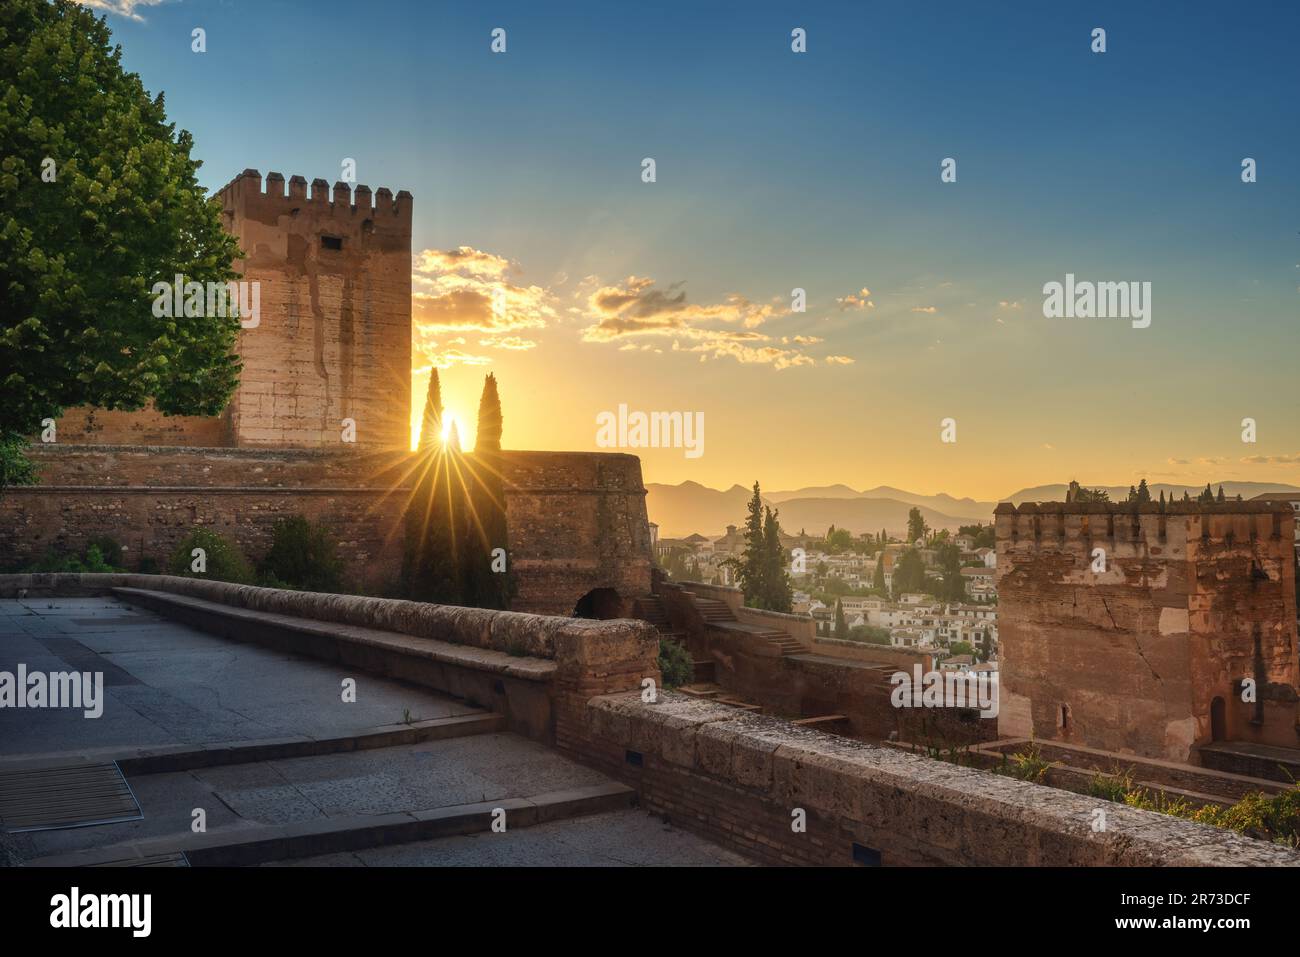 Alcazaba at sunset with Torre del Homenaje (Keep) and Turret Tower (Torre del Cubo) at Alhambra - Granada, Andalusia, Spain Stock Photo